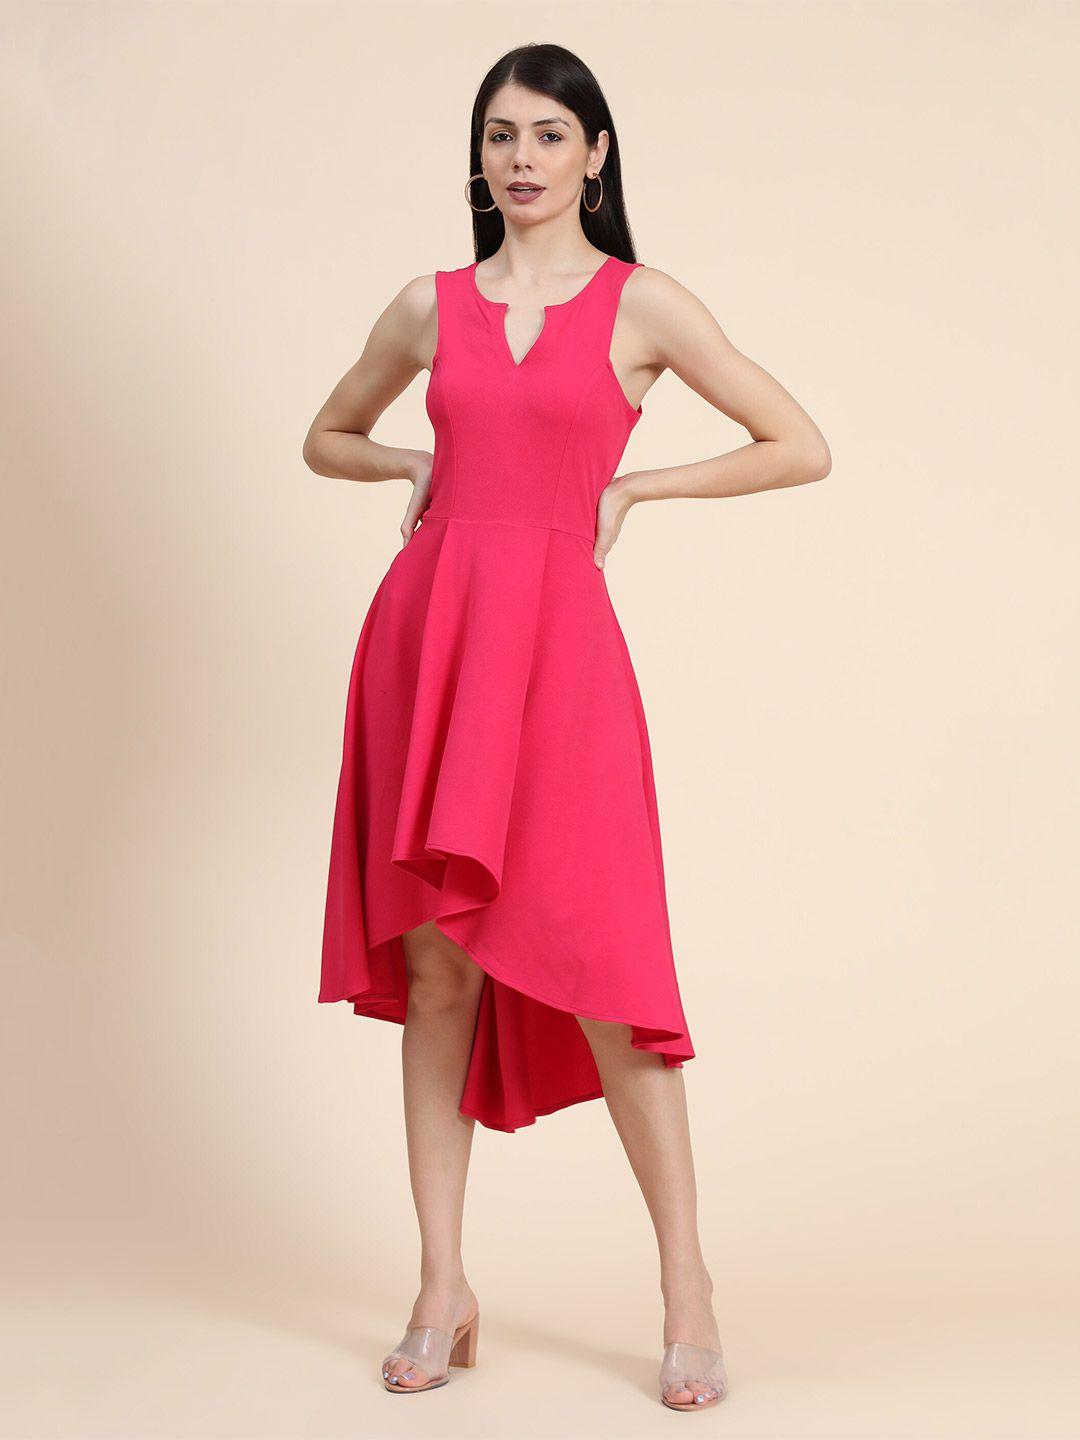 keri-perry-women-pink-solid-high-low-dress